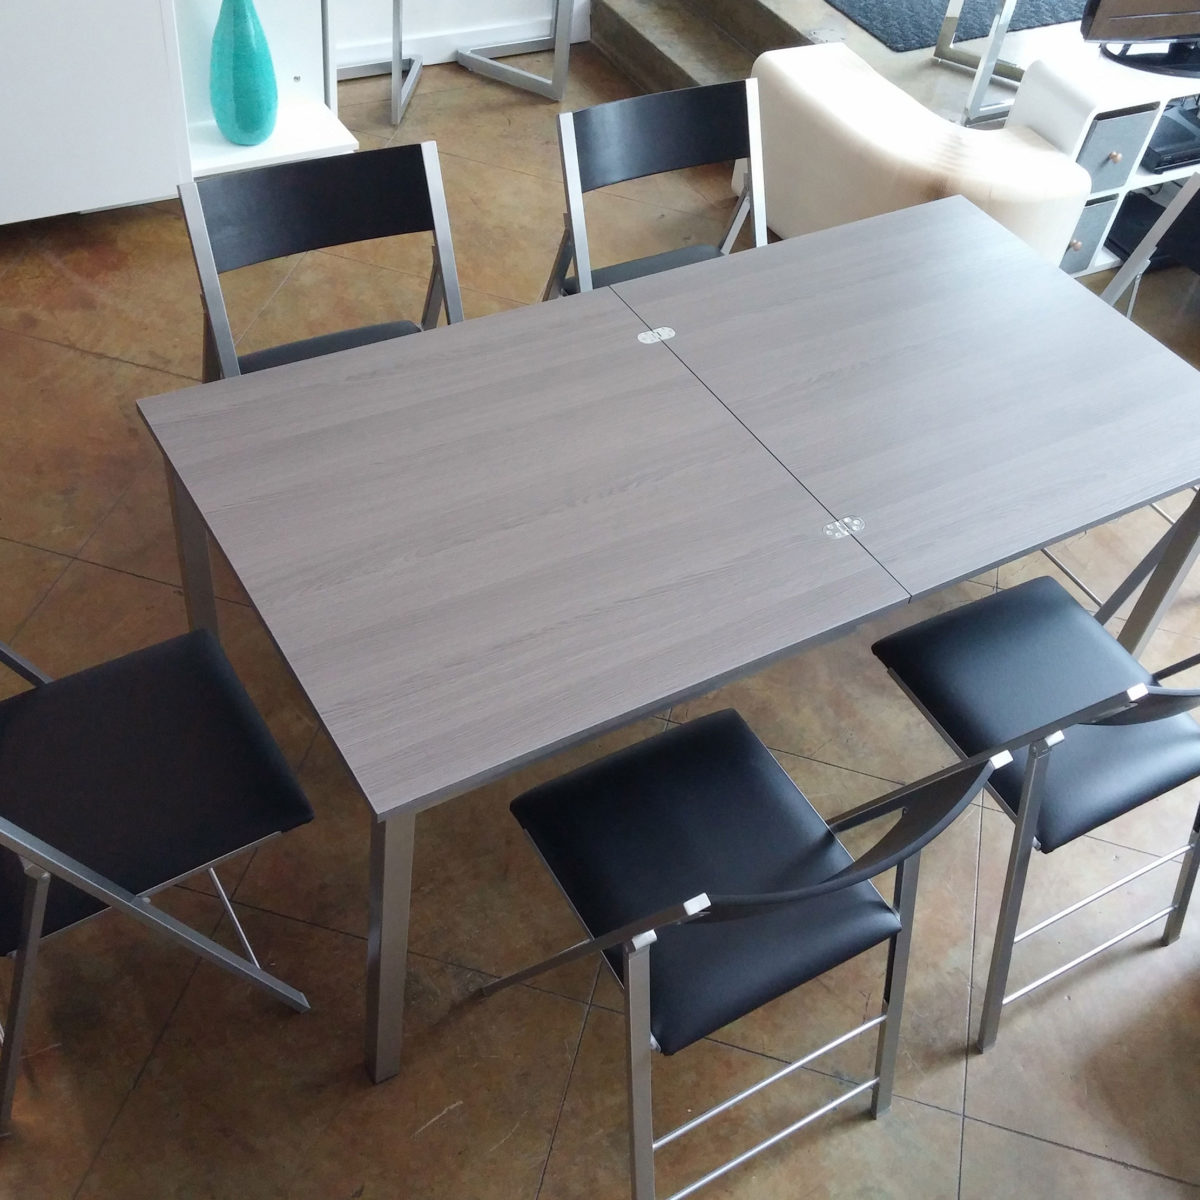 Echo Square Grey Table With 6 Black Folding Chairs 1 1200x1200 